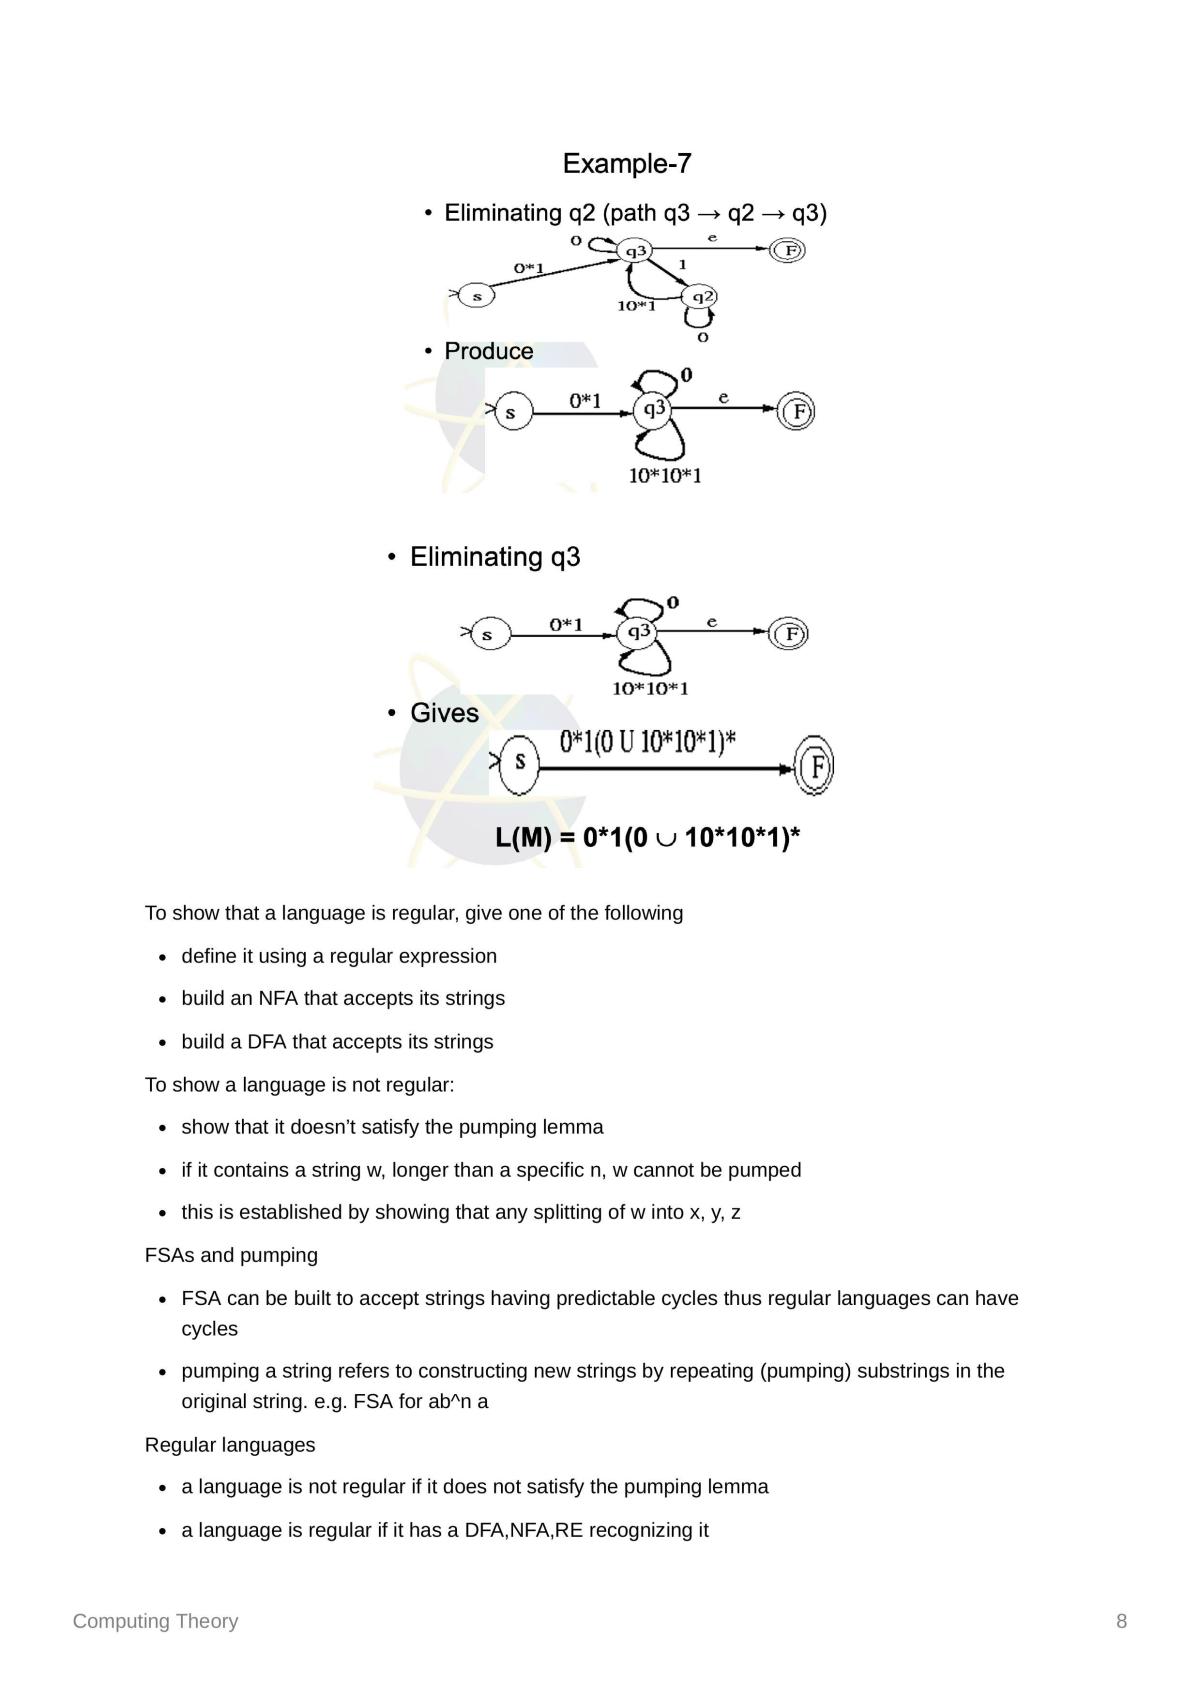 Computing theory complete notes  - Page 8